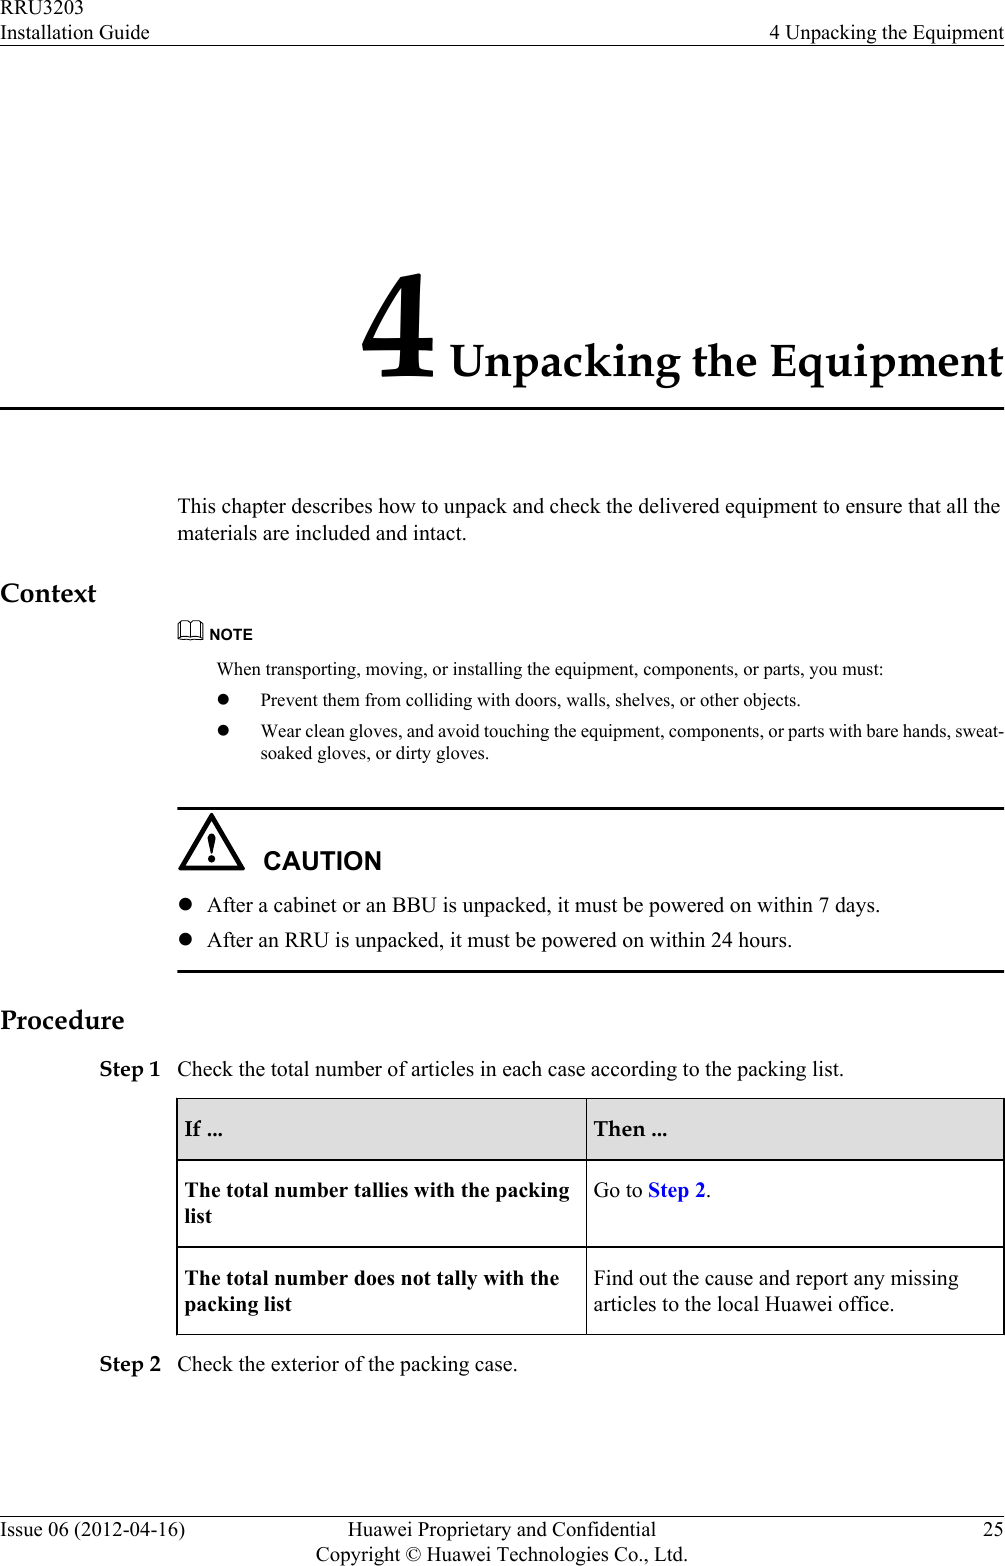 4 Unpacking the EquipmentThis chapter describes how to unpack and check the delivered equipment to ensure that all thematerials are included and intact.ContextNOTEWhen transporting, moving, or installing the equipment, components, or parts, you must:lPrevent them from colliding with doors, walls, shelves, or other objects.lWear clean gloves, and avoid touching the equipment, components, or parts with bare hands, sweat-soaked gloves, or dirty gloves.CAUTIONlAfter a cabinet or an BBU is unpacked, it must be powered on within 7 days.lAfter an RRU is unpacked, it must be powered on within 24 hours.ProcedureStep 1 Check the total number of articles in each case according to the packing list.If ... Then ...The total number tallies with the packinglistGo to Step 2.The total number does not tally with thepacking listFind out the cause and report any missingarticles to the local Huawei office.Step 2 Check the exterior of the packing case.RRU3203Installation Guide 4 Unpacking the EquipmentIssue 06 (2012-04-16) Huawei Proprietary and ConfidentialCopyright © Huawei Technologies Co., Ltd.25